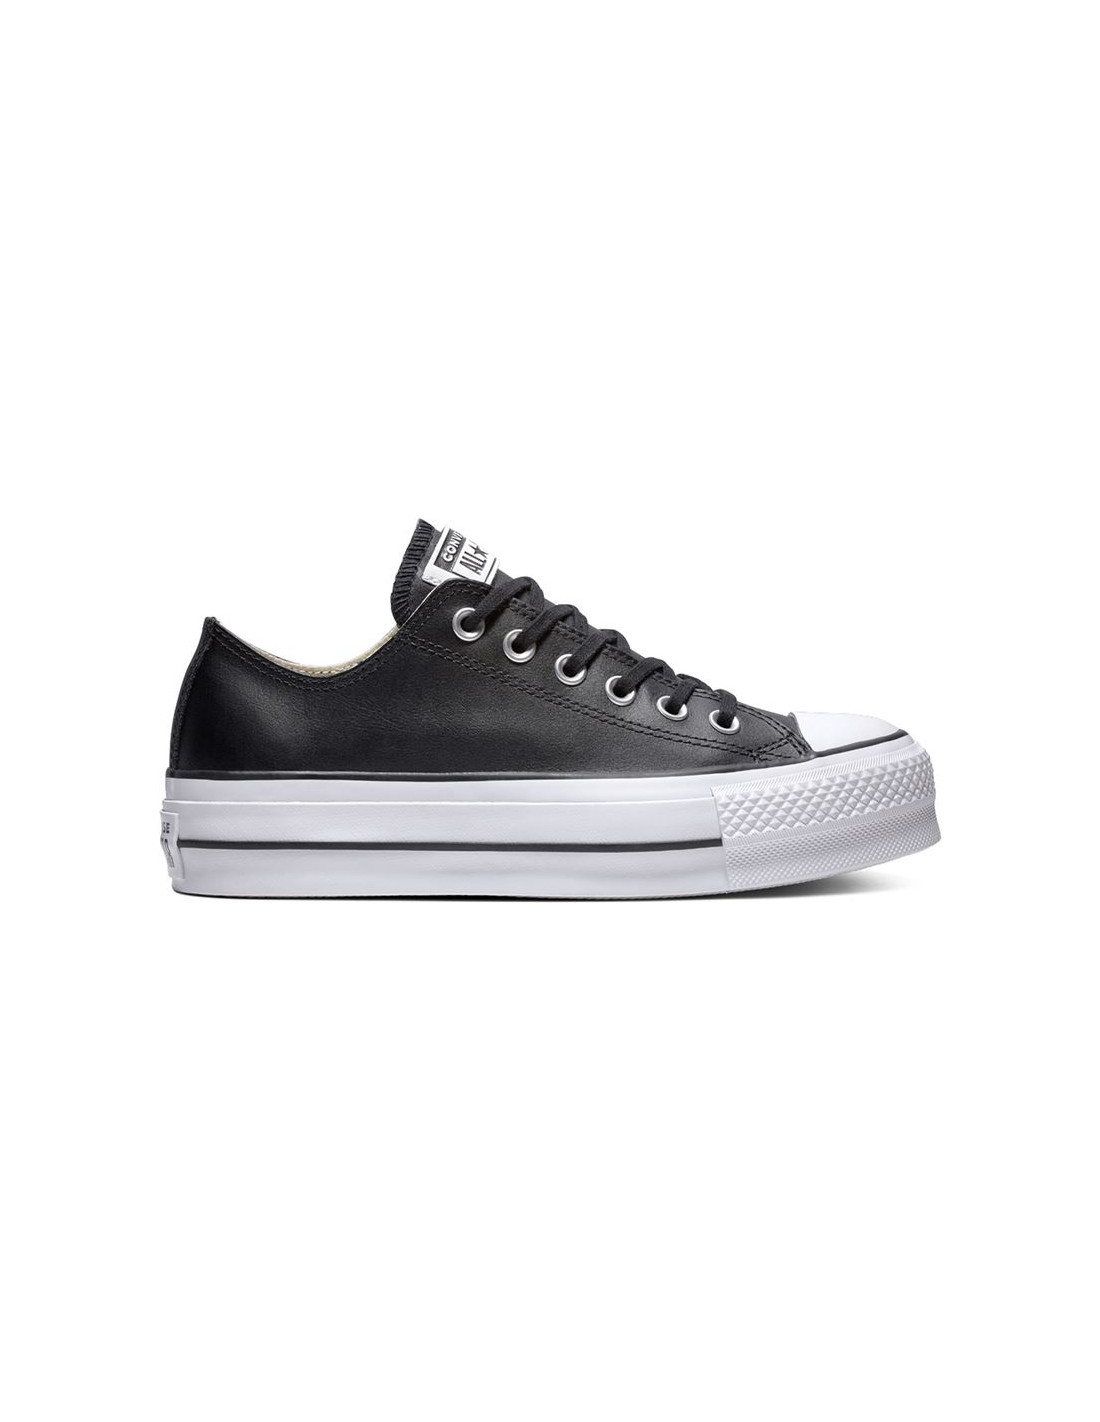 Zapatillas converse chuck taylor all star lift leather low top bk